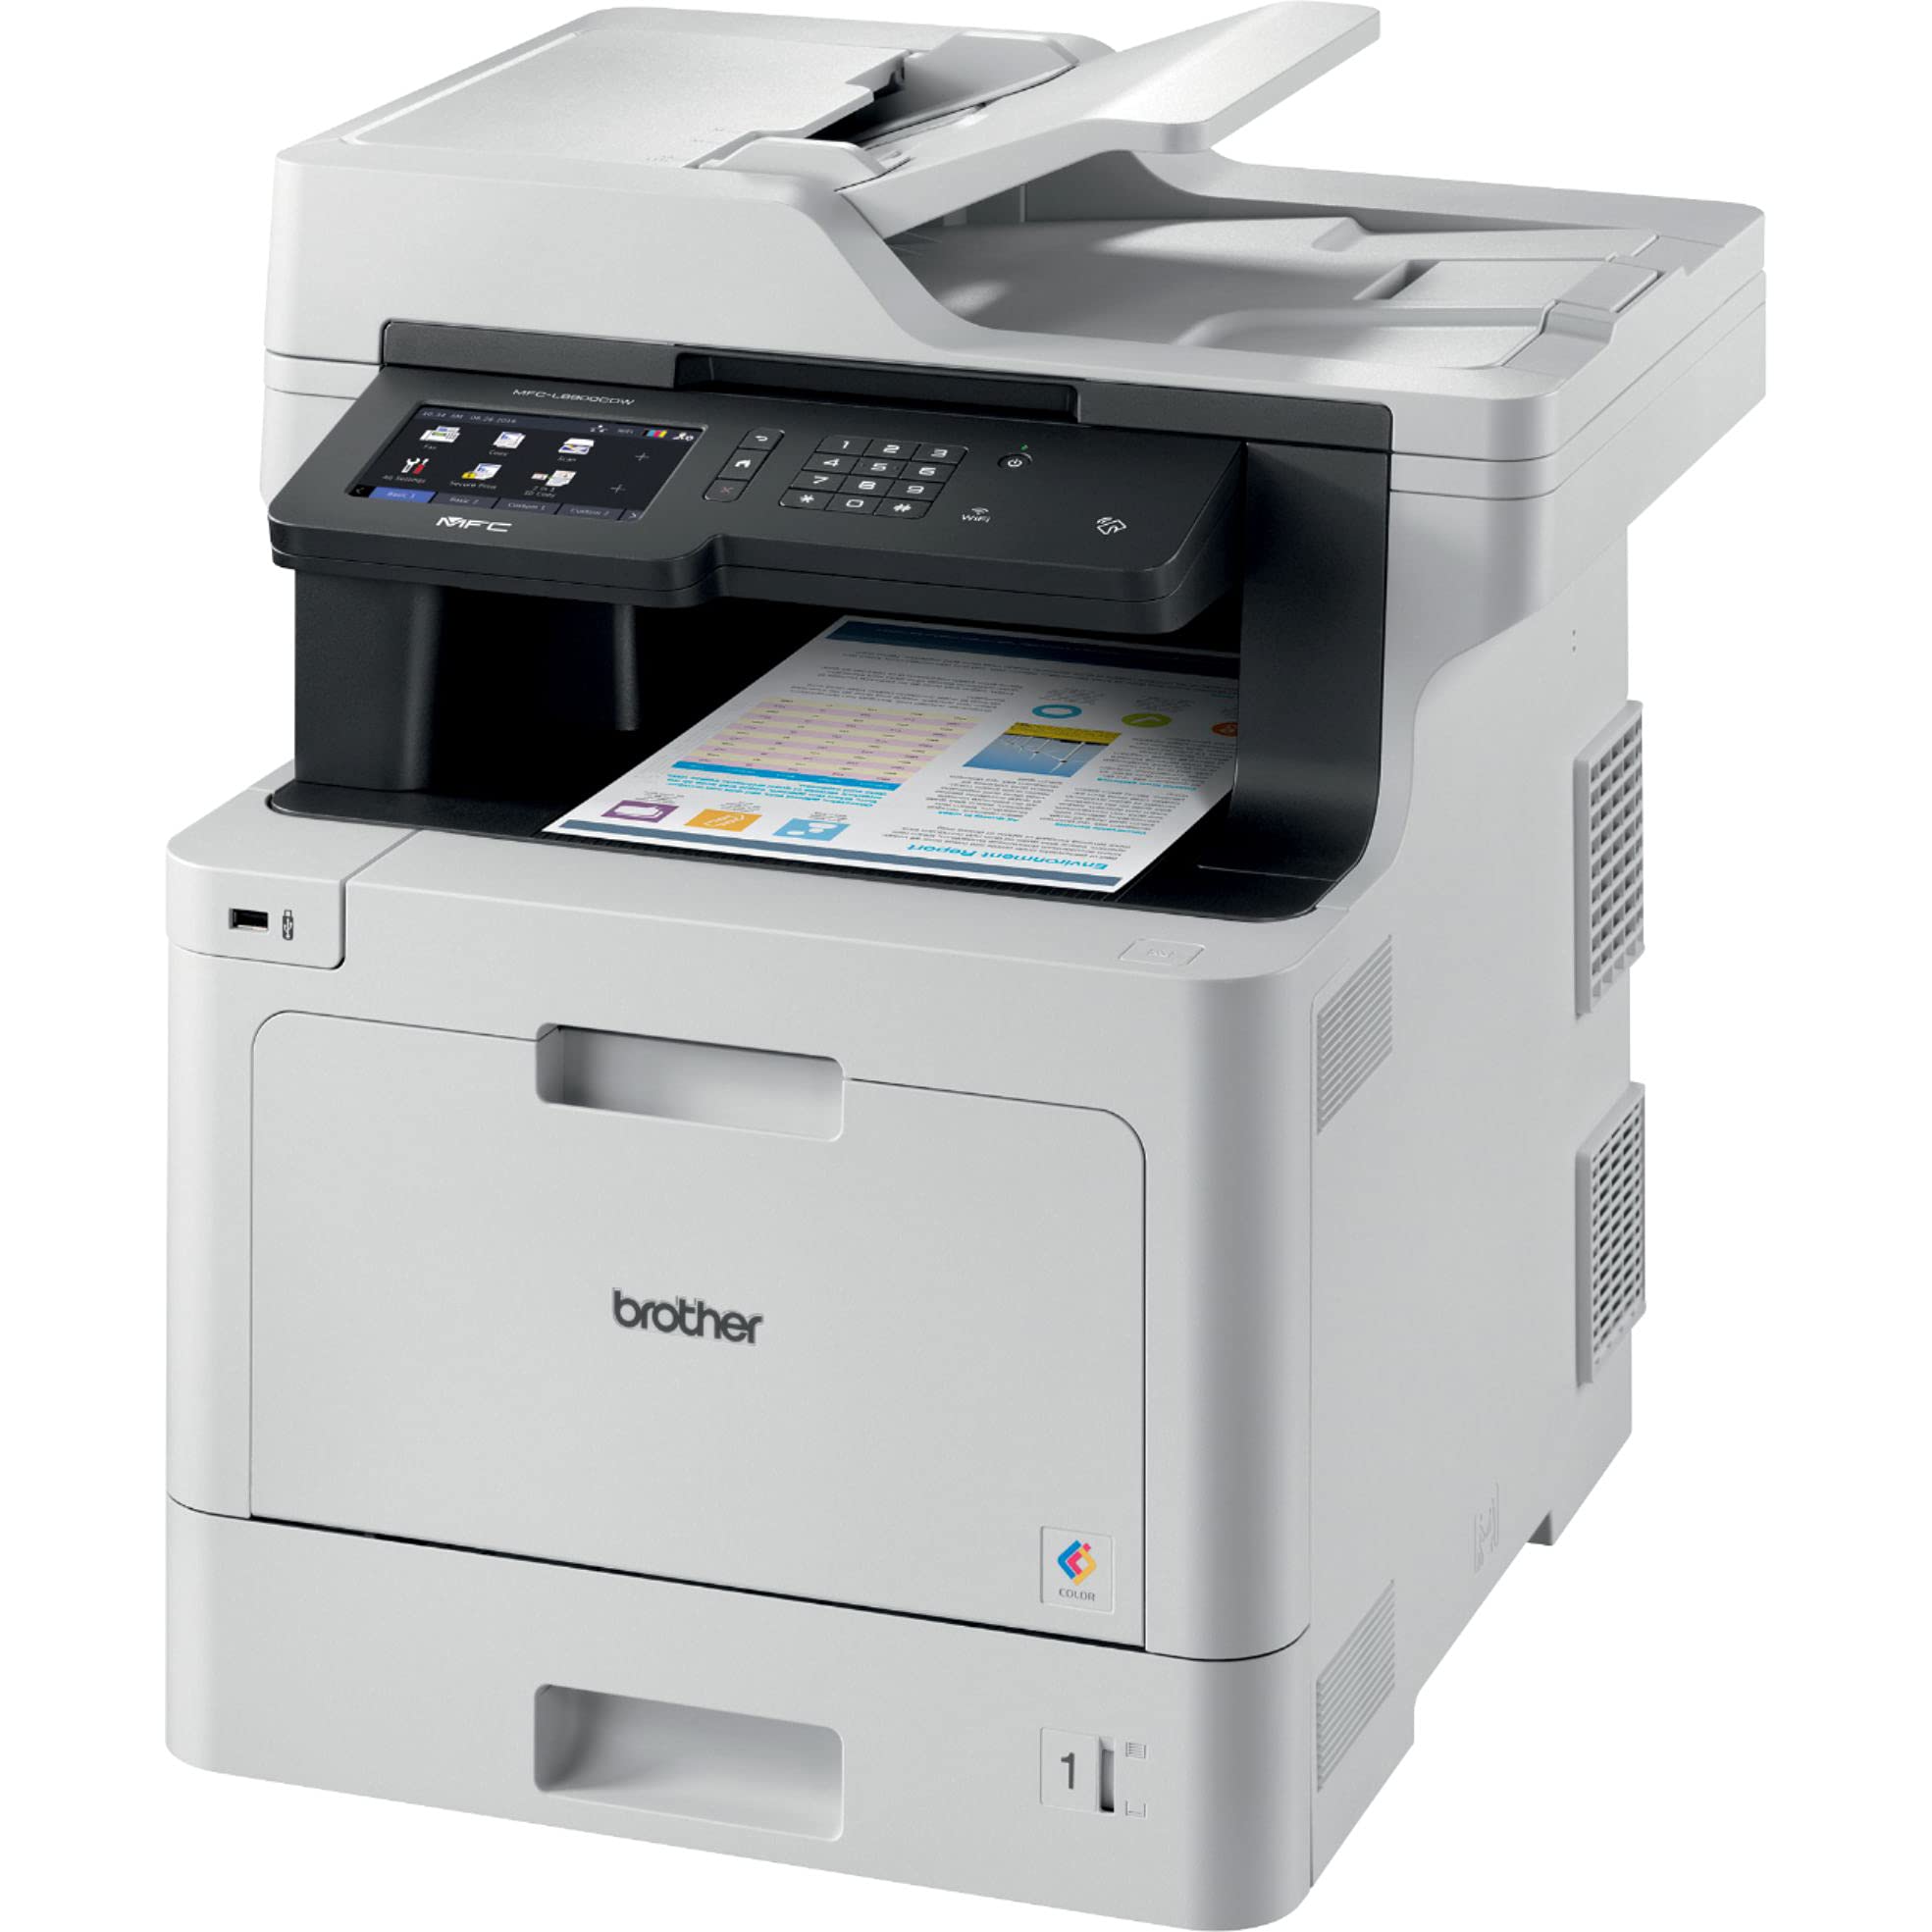 Brother MFC-L8900CDWB All-in-One Wireless Color Laser Printer for Office - 4-IN-1 Print Copy Scan Fax - 5